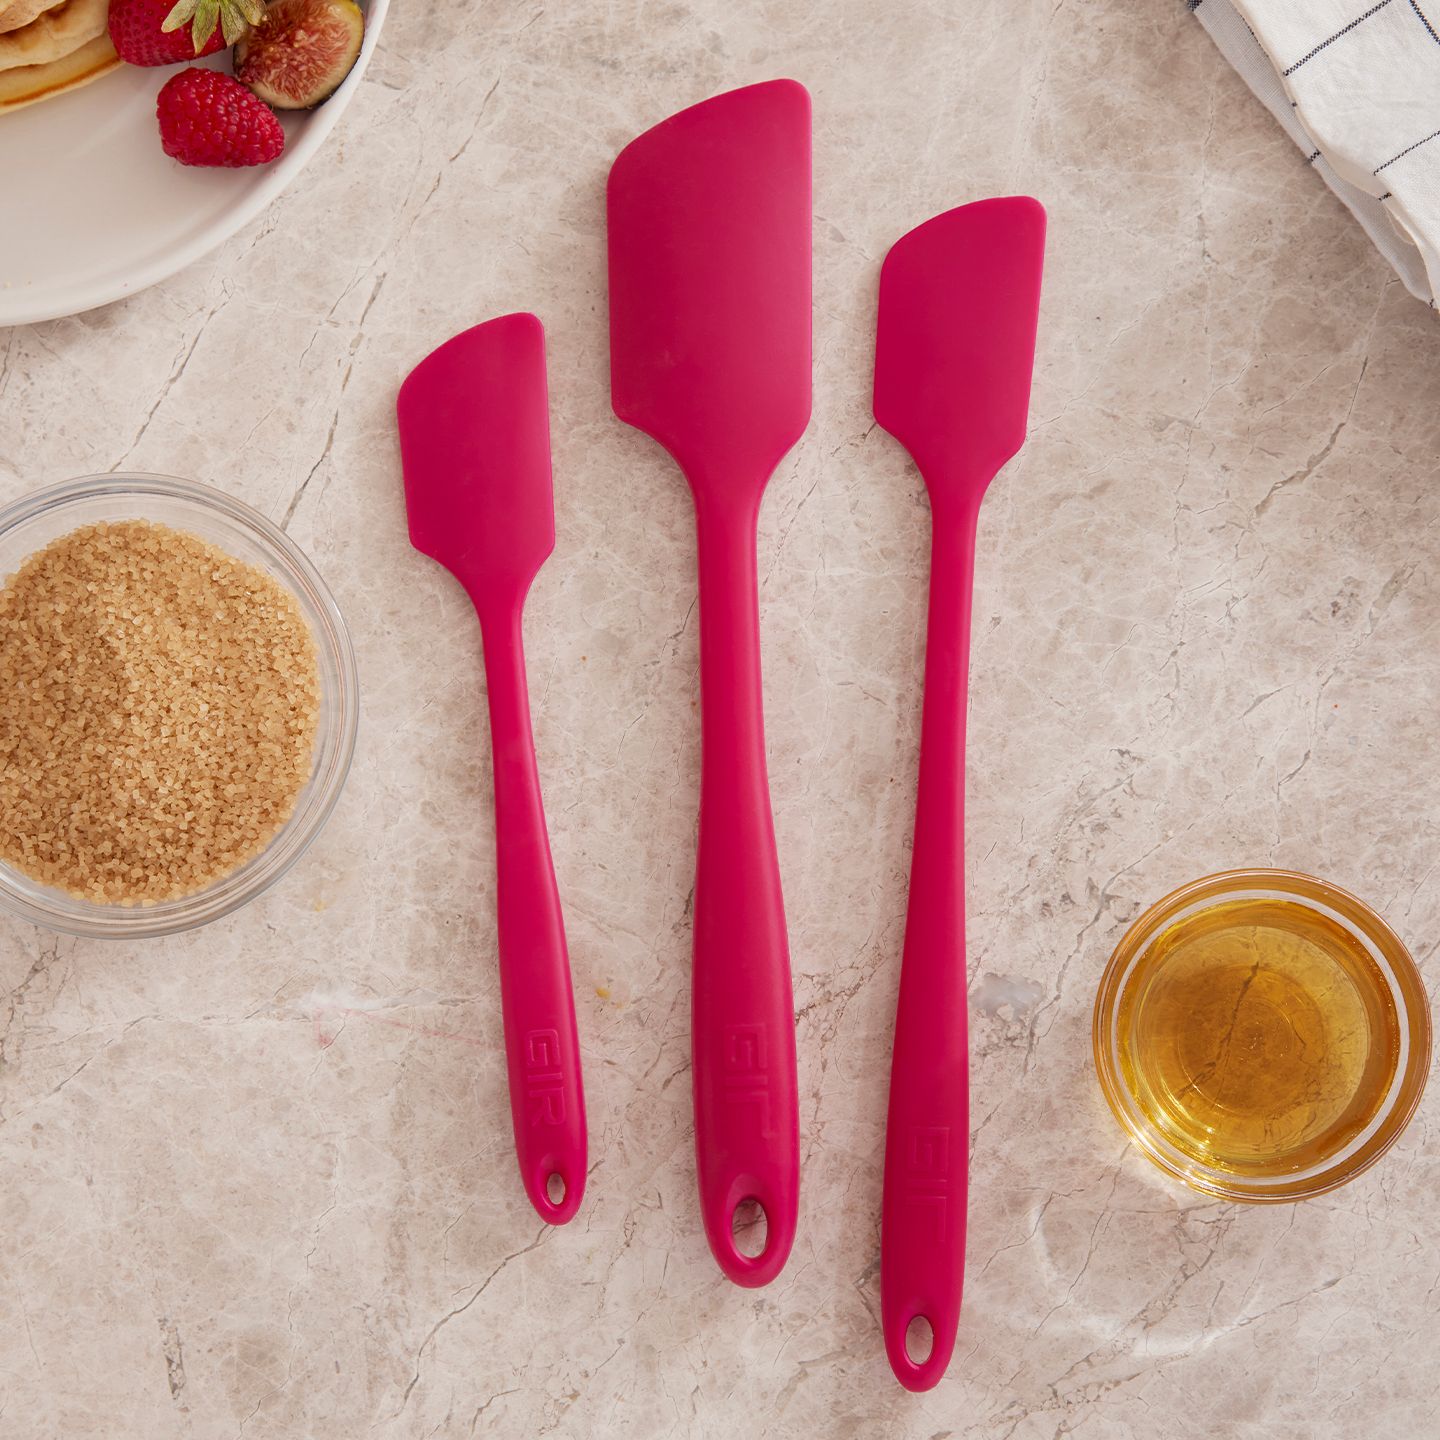 Nonstick Small Kitchen Spatulas for Cooking Mini and Mixing 8 IN Seamless GIR: Get It Right Premium Silicone Spatula Heat-Resistant up to 550°F Lime Baking 